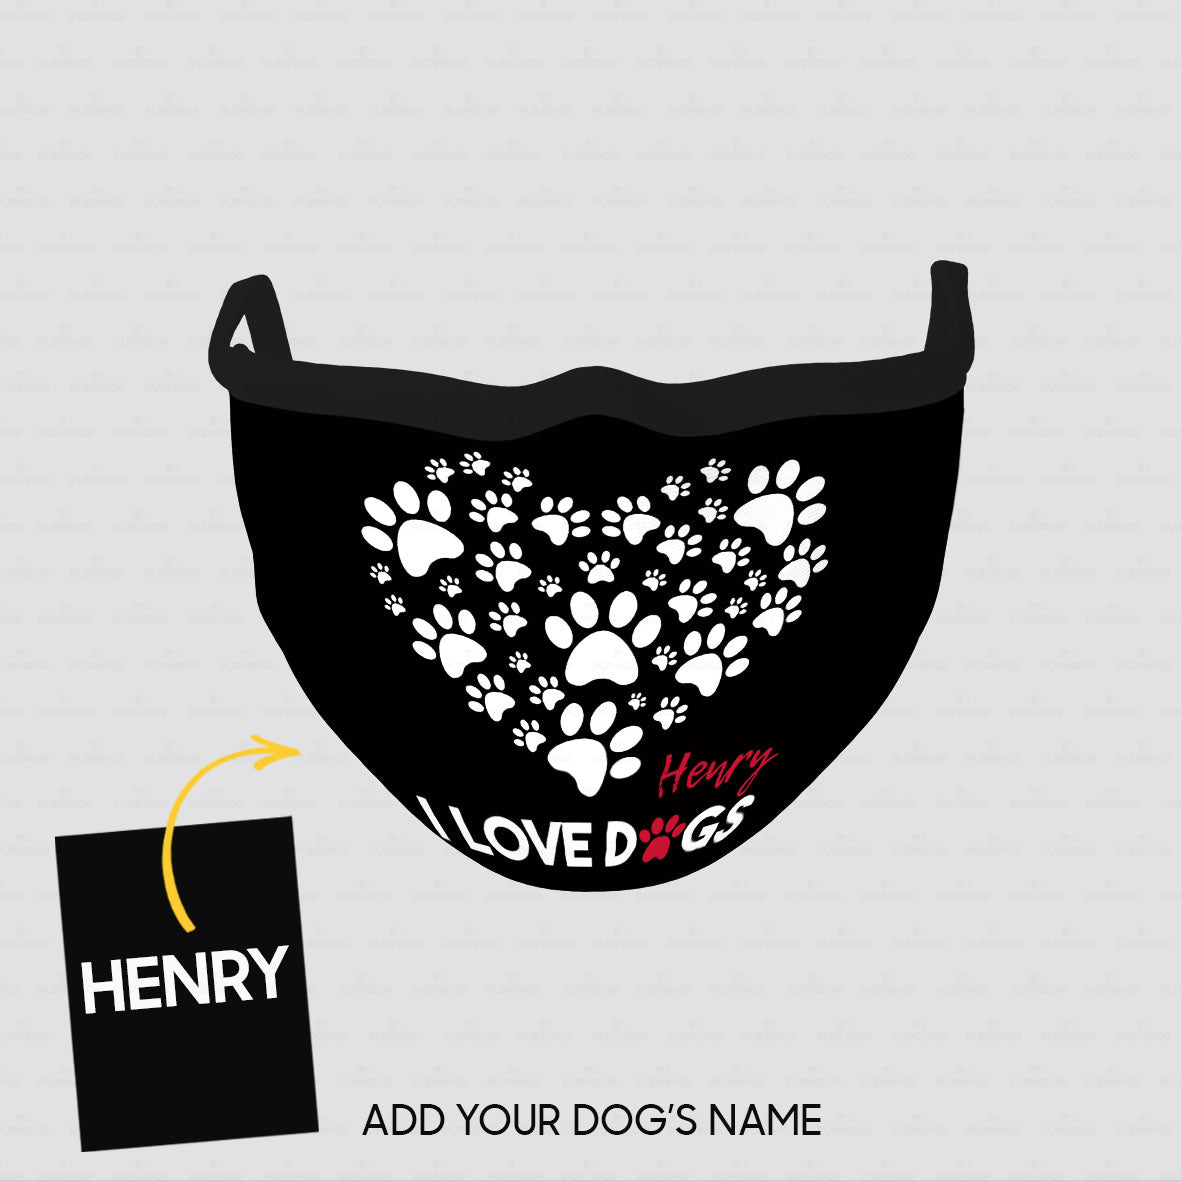 Personalized Dog Gift Idea - Dog Paws 4 For Dog Lovers - Cloth Mask